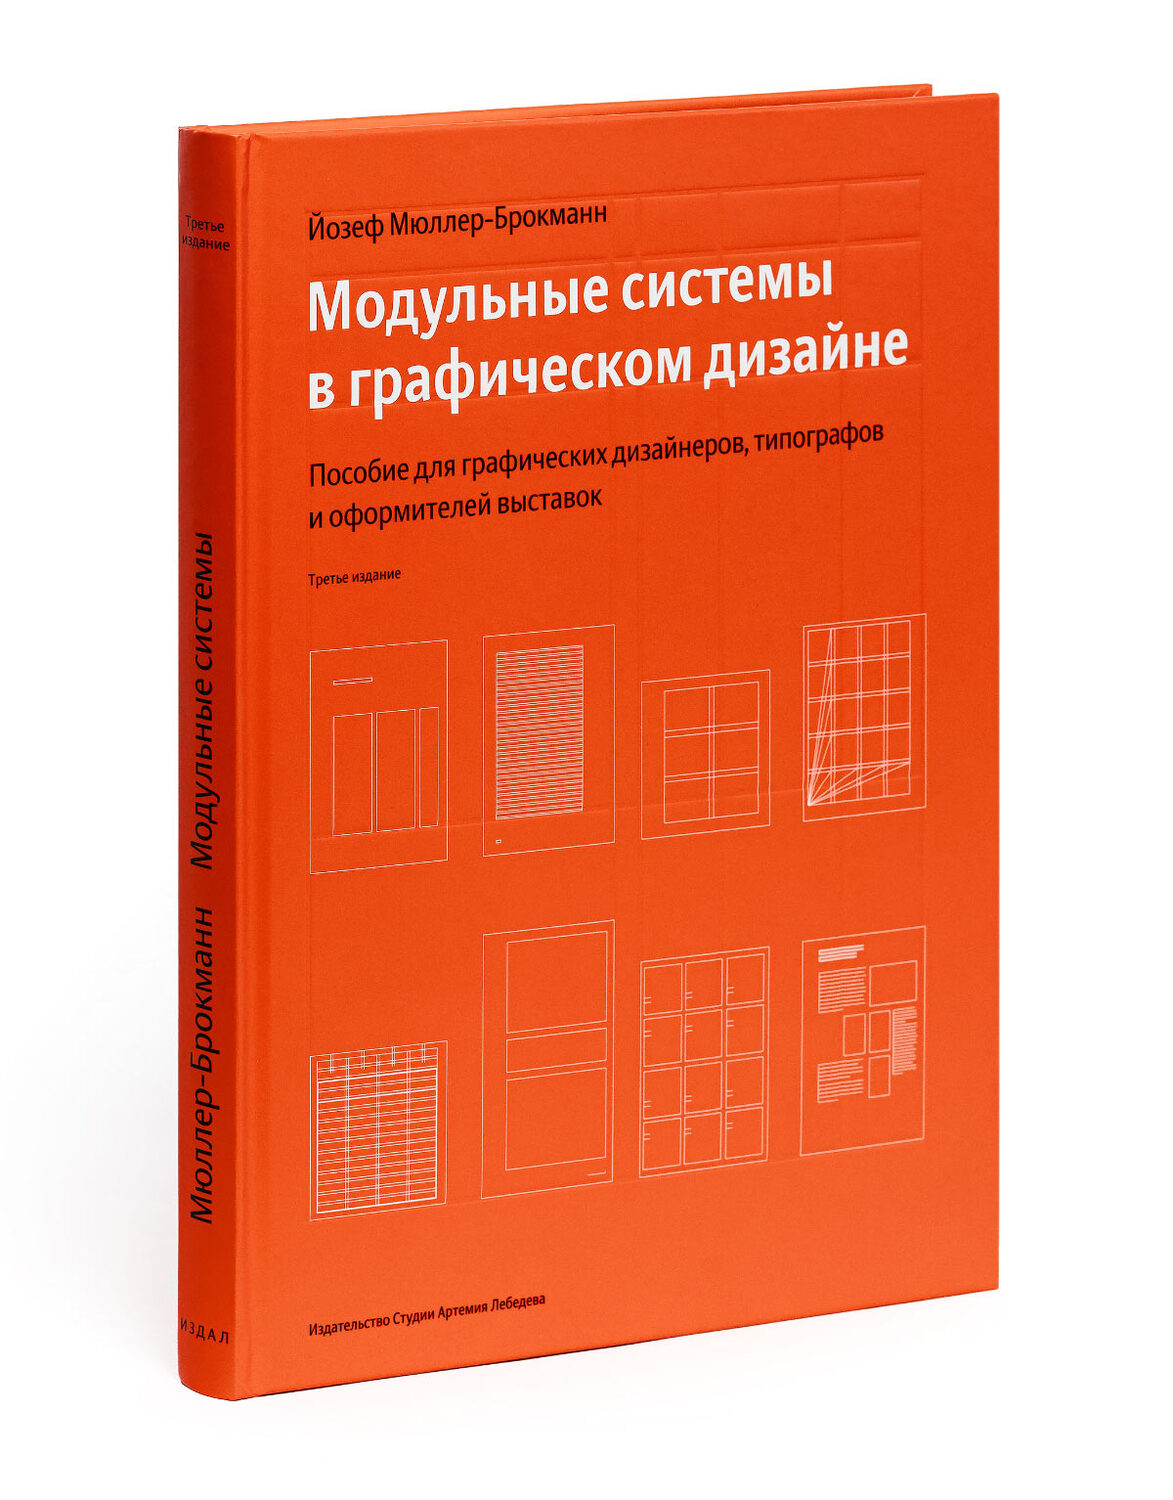 Grid Systems in Graphic Design: A Handbook for Graphic Artists, Typographers and Exhibition Designers, third edition (in Russian)